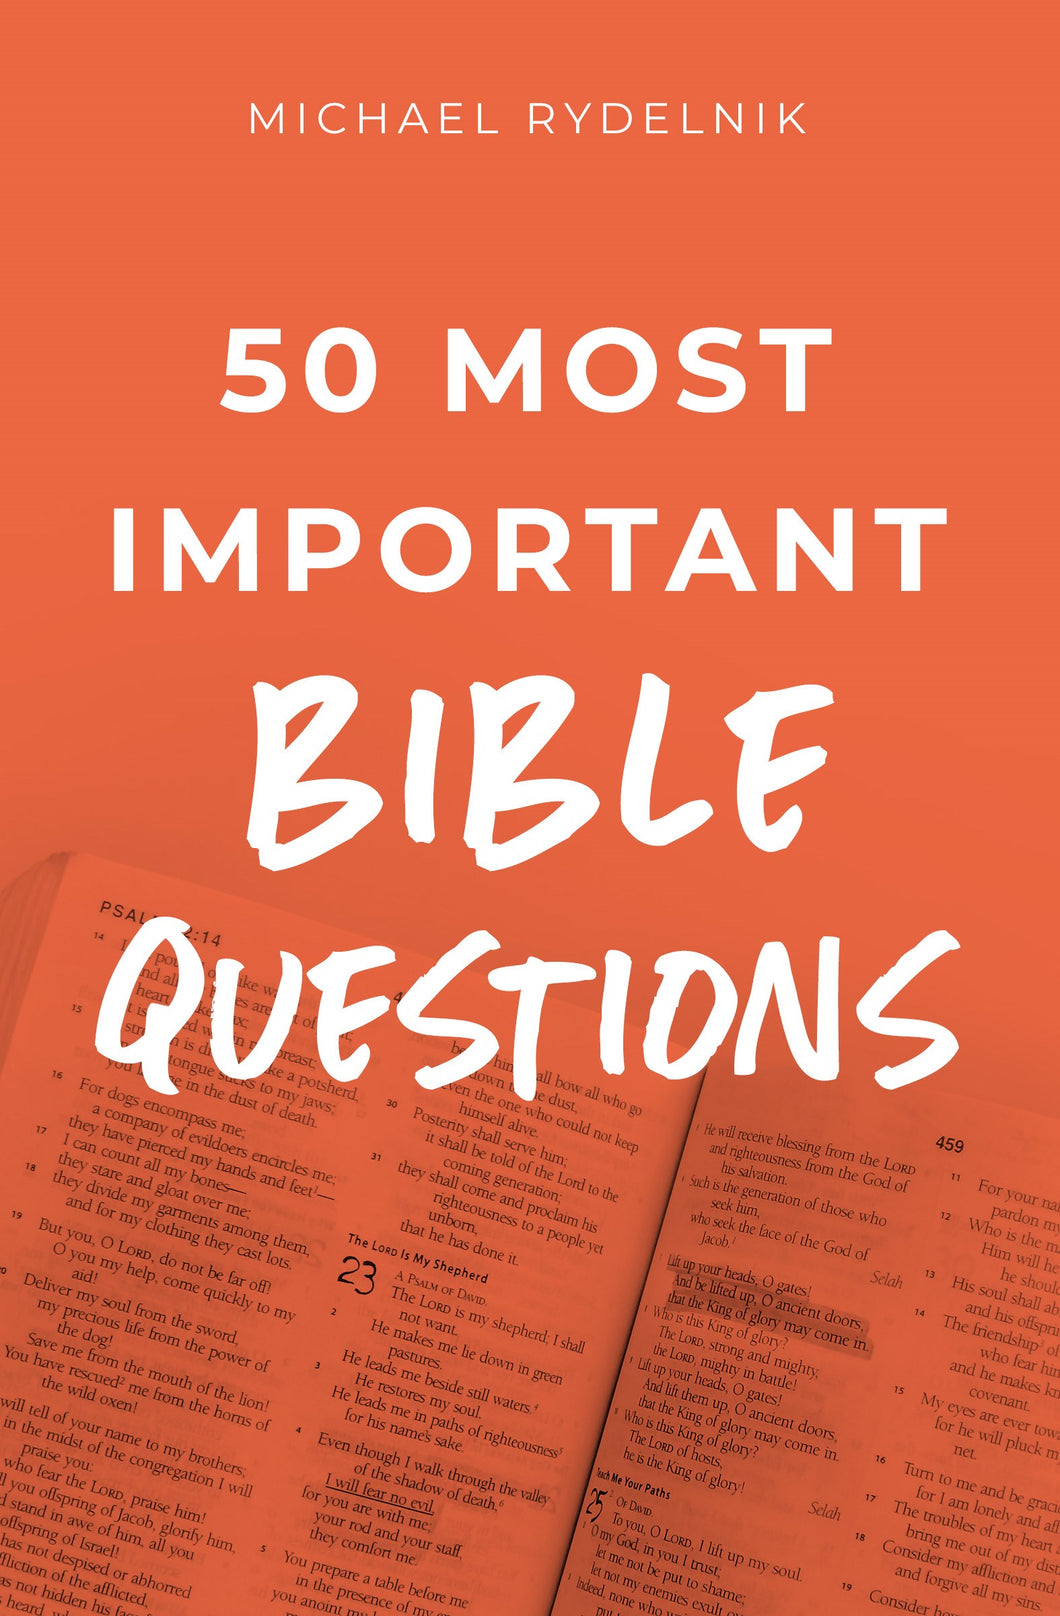 50 Most Important Questions About The Bible